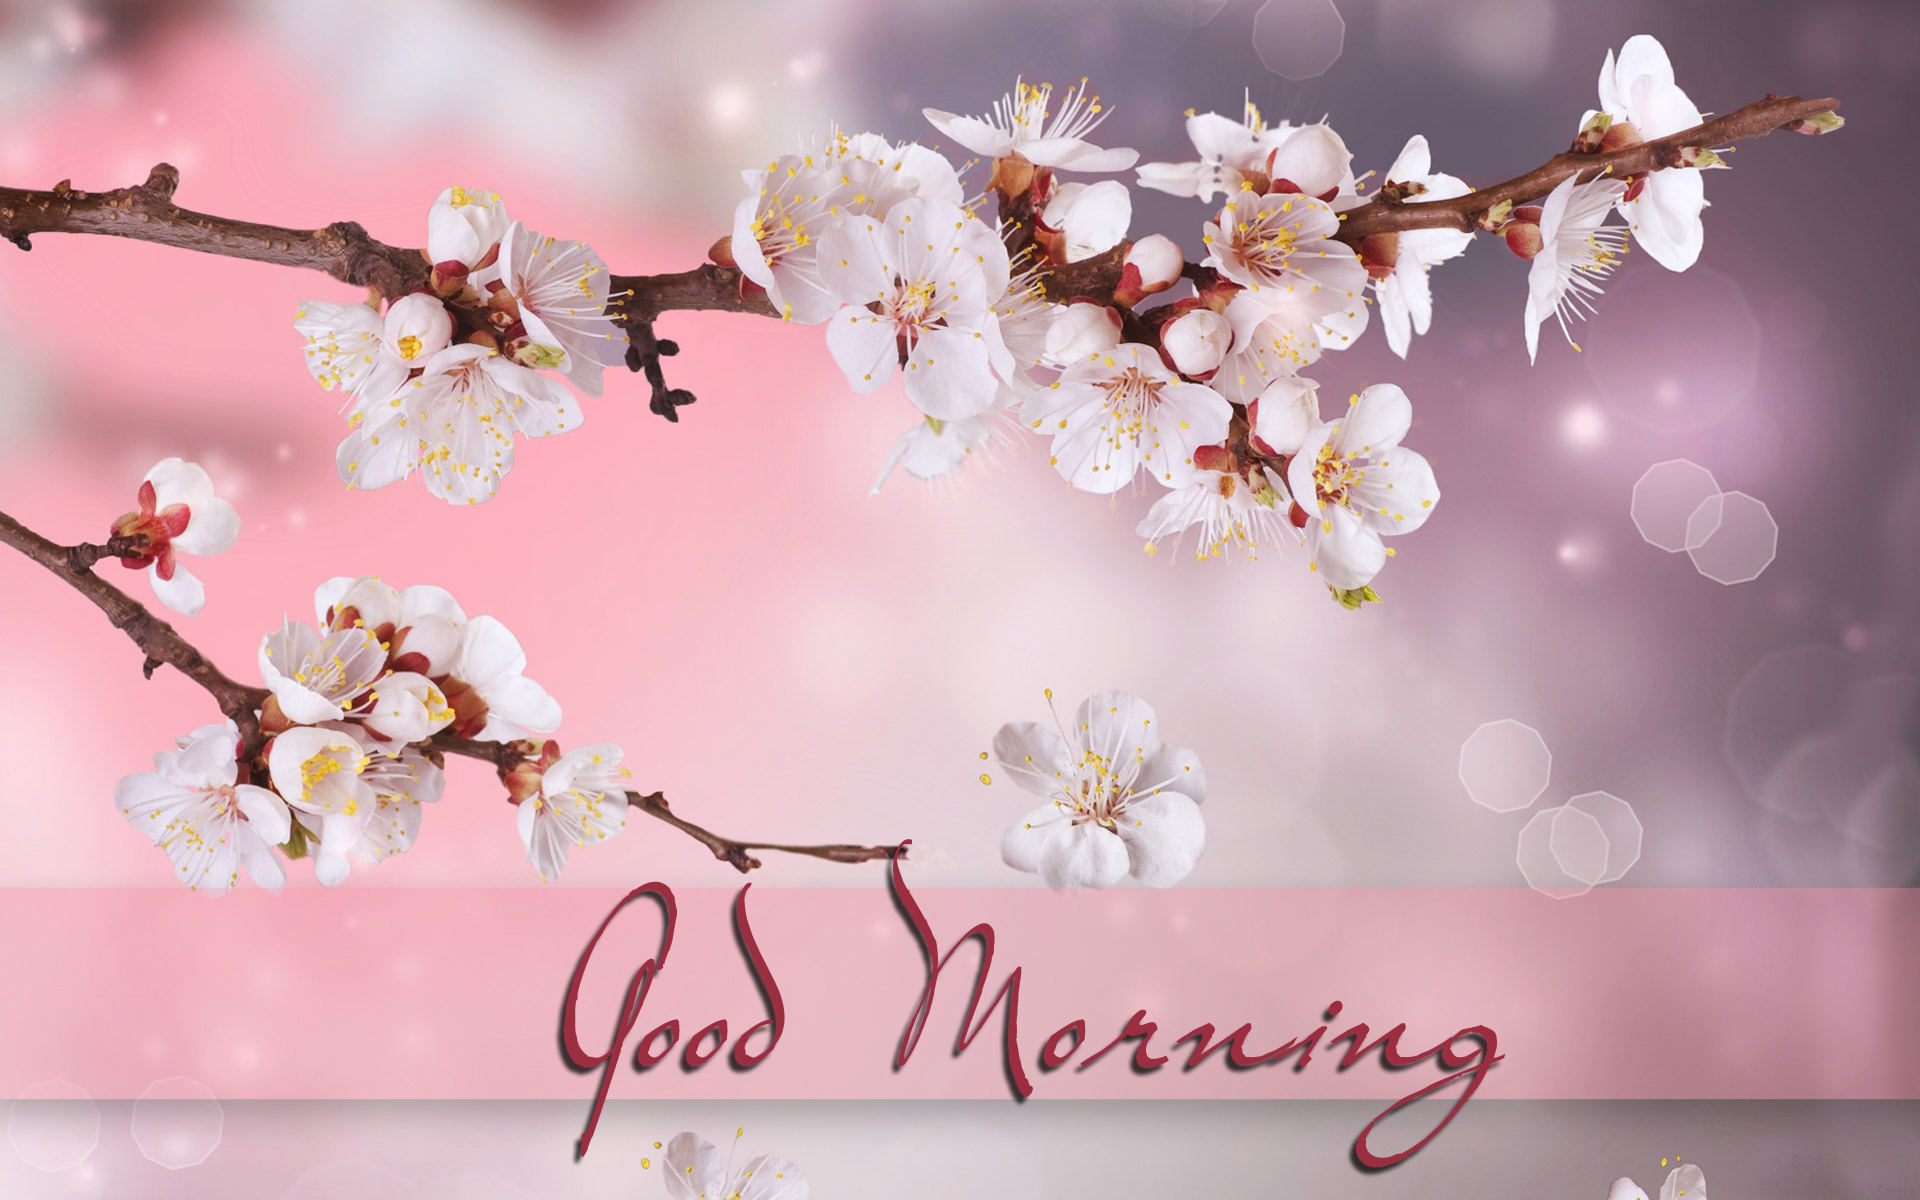 Good Morning Hd Wallpaper Free Download for your friends